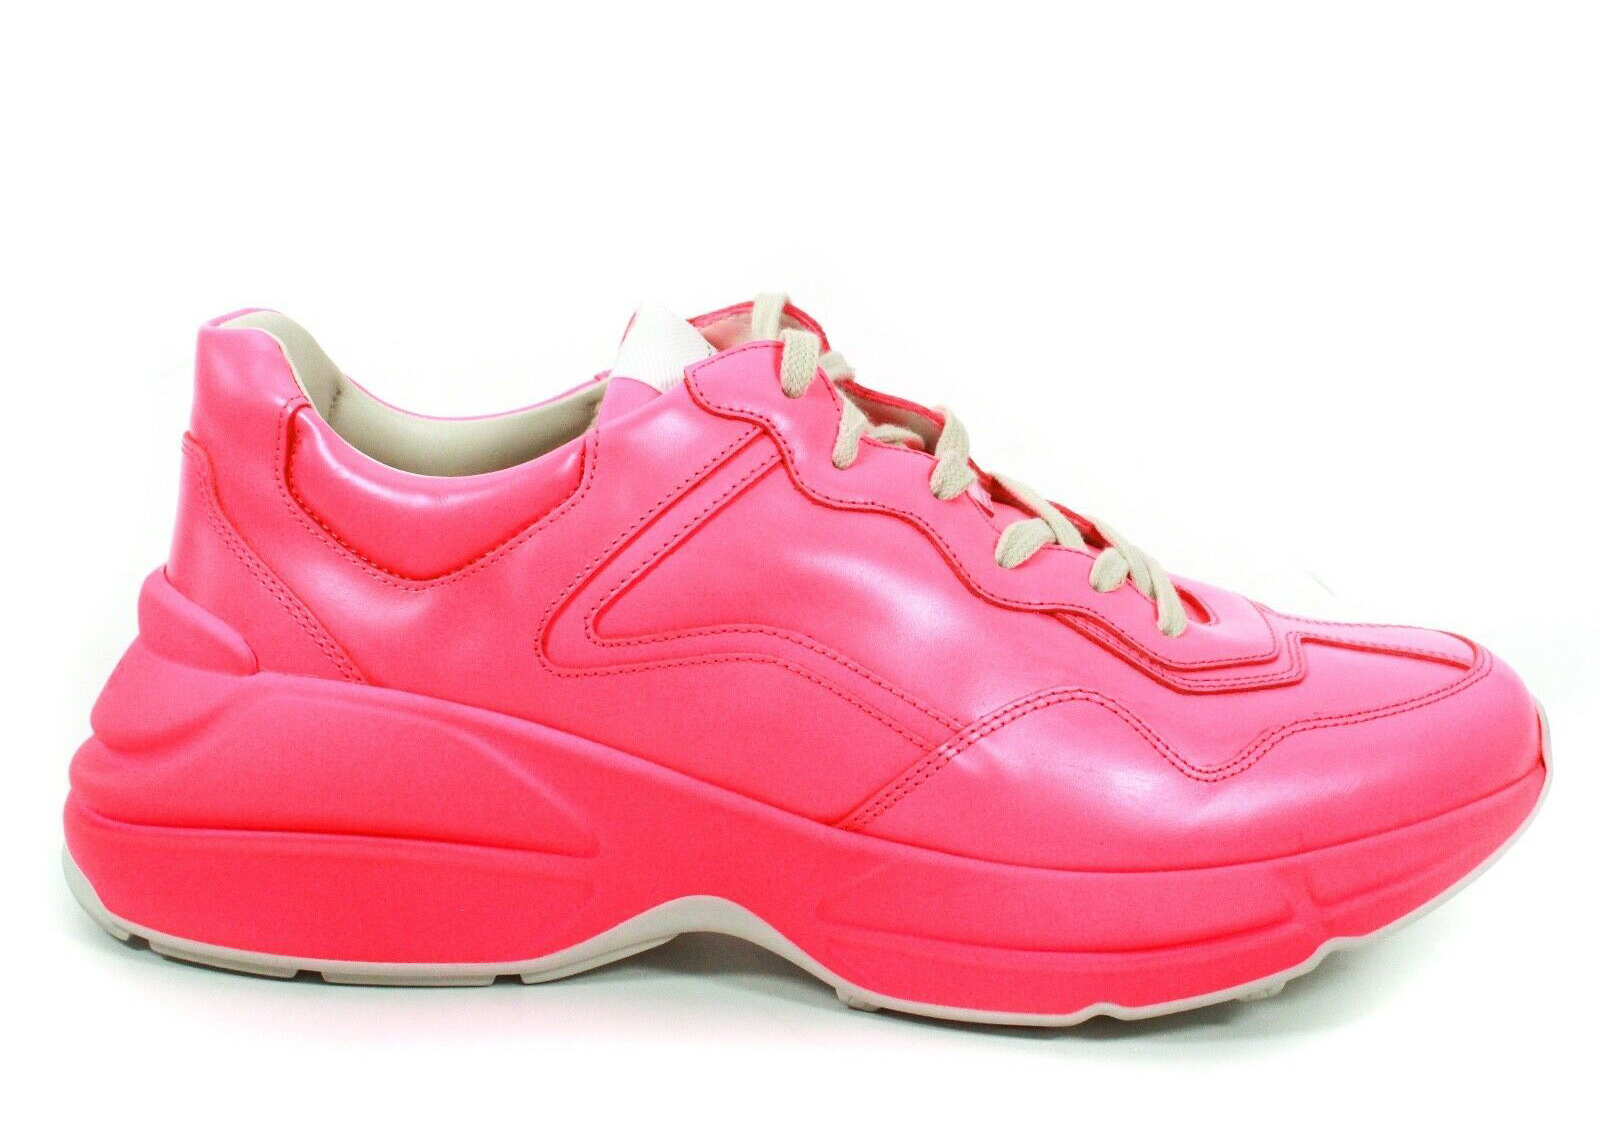 Gucci Rhyton Neon Pink - Sneakers